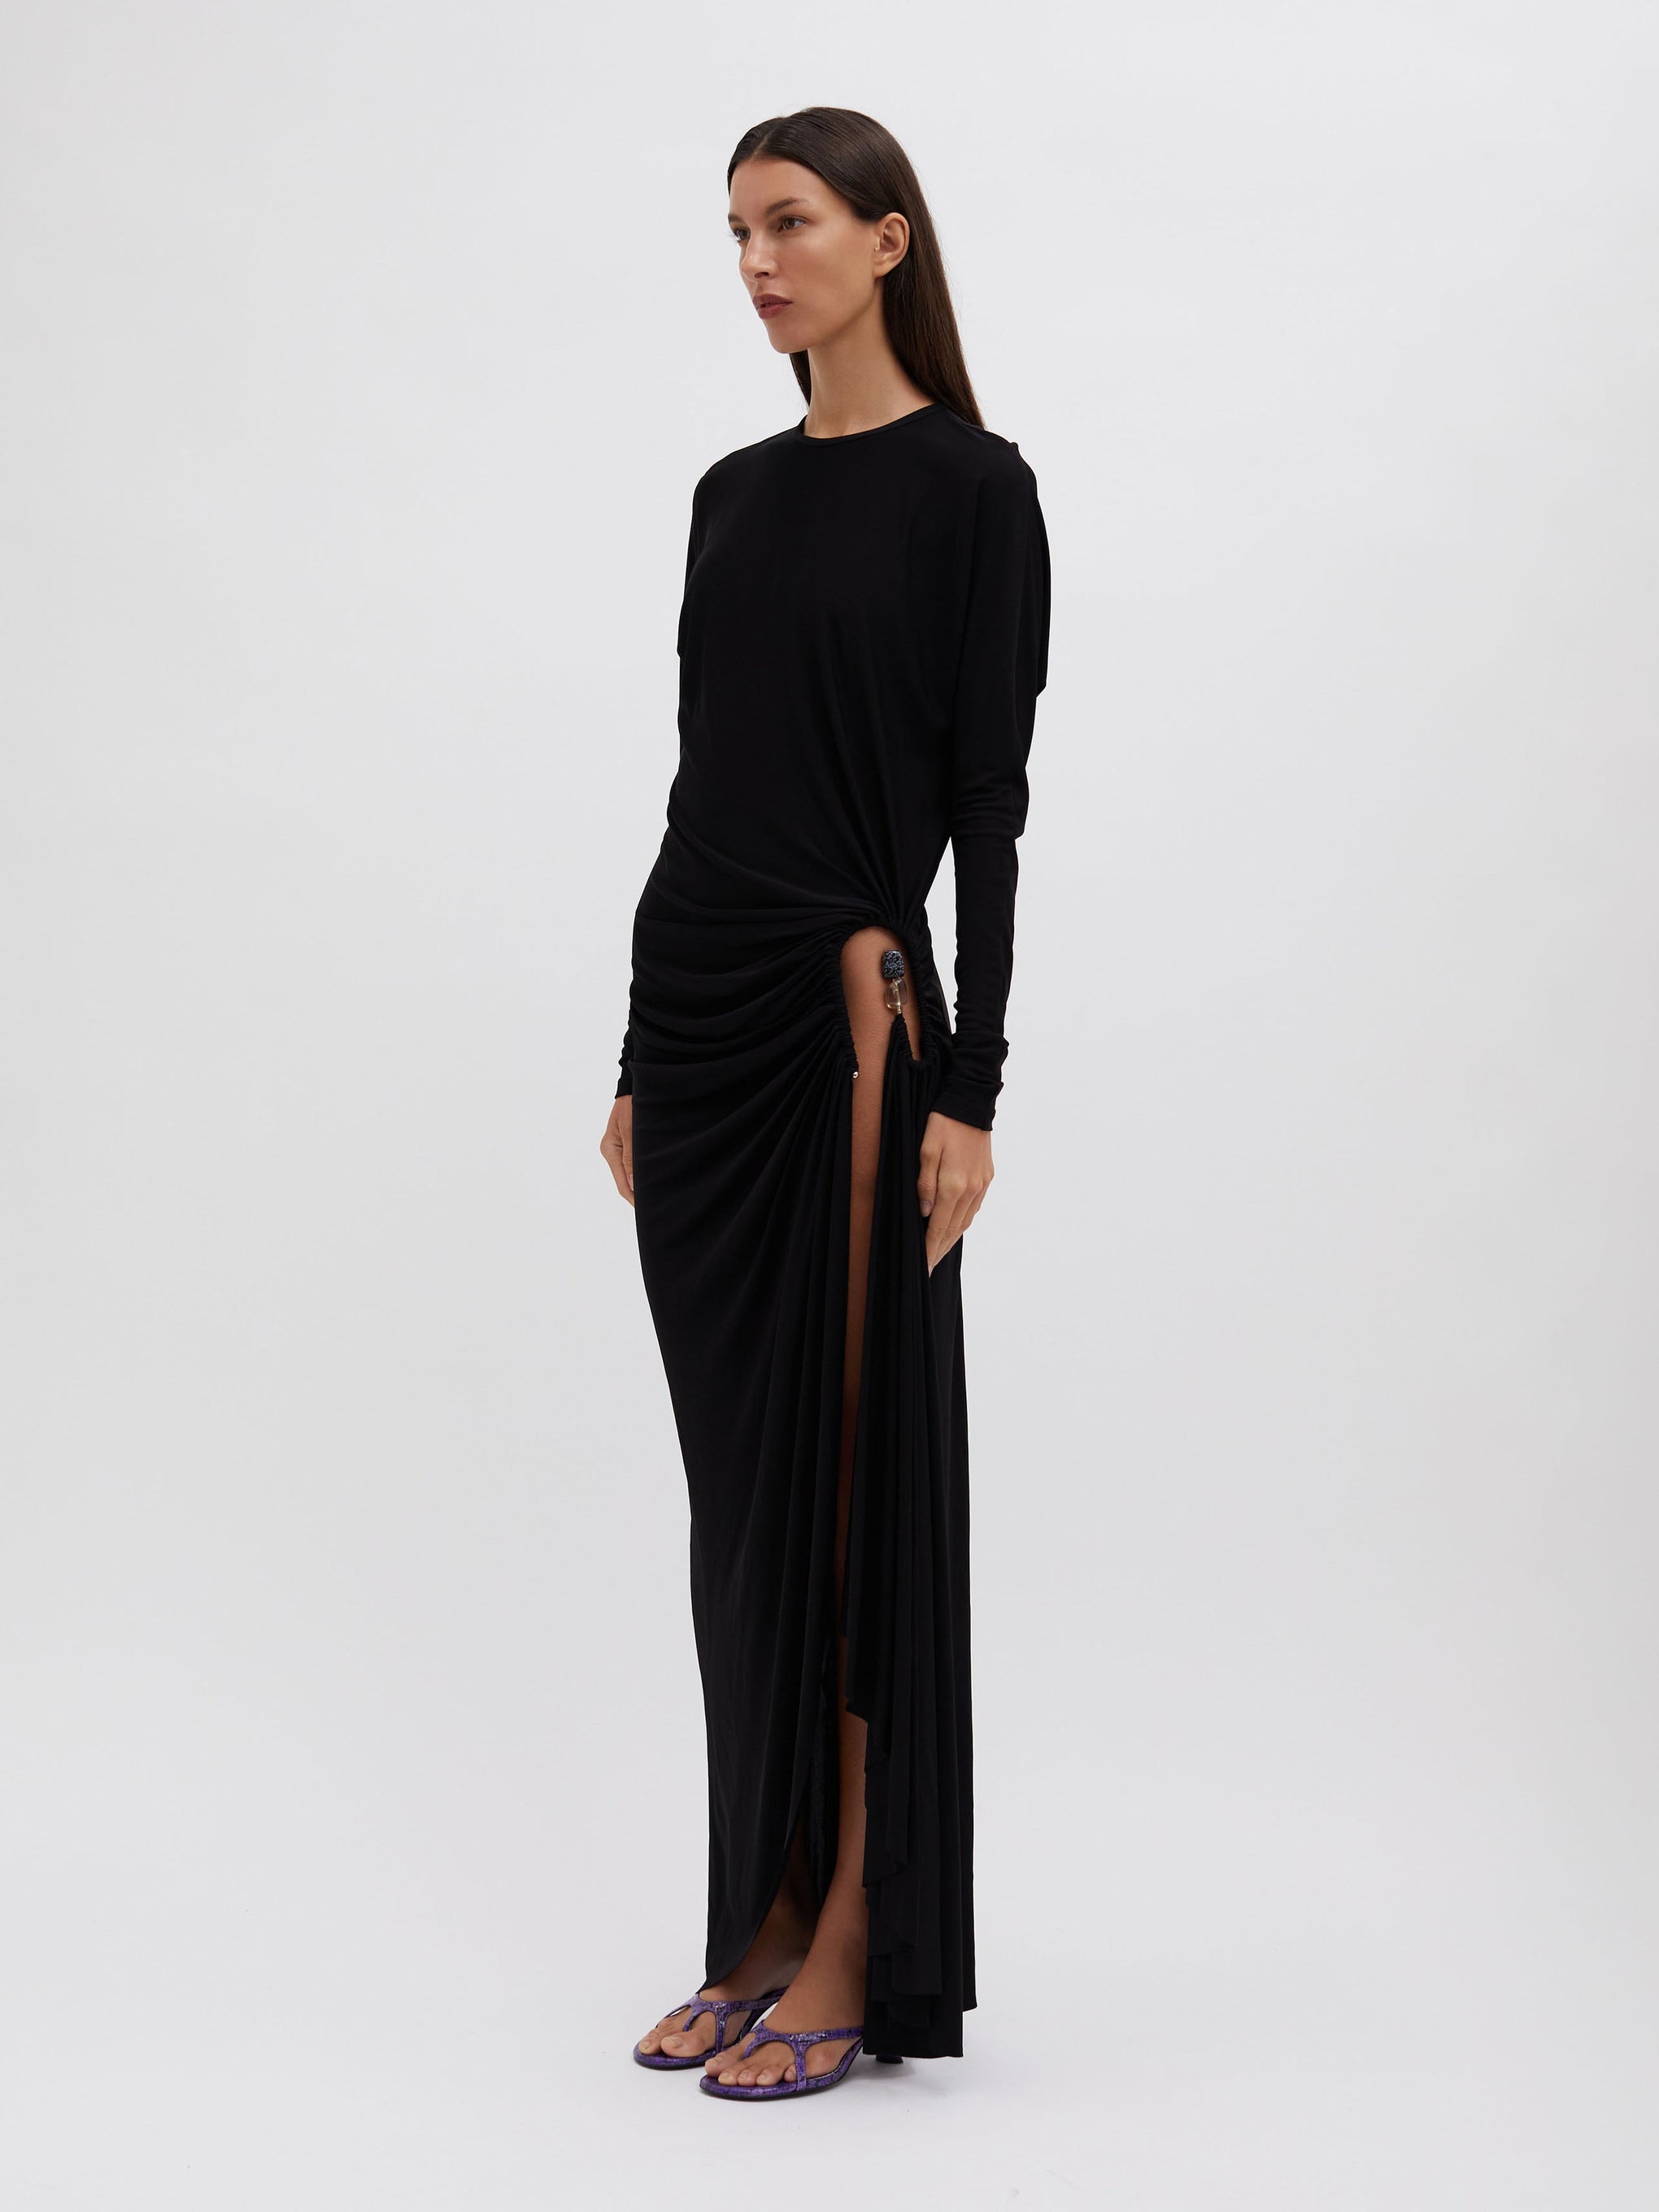 The Christopher Esber Helix Crystal Stone Long Sleeve Dress in Black available at The New Trend Australia